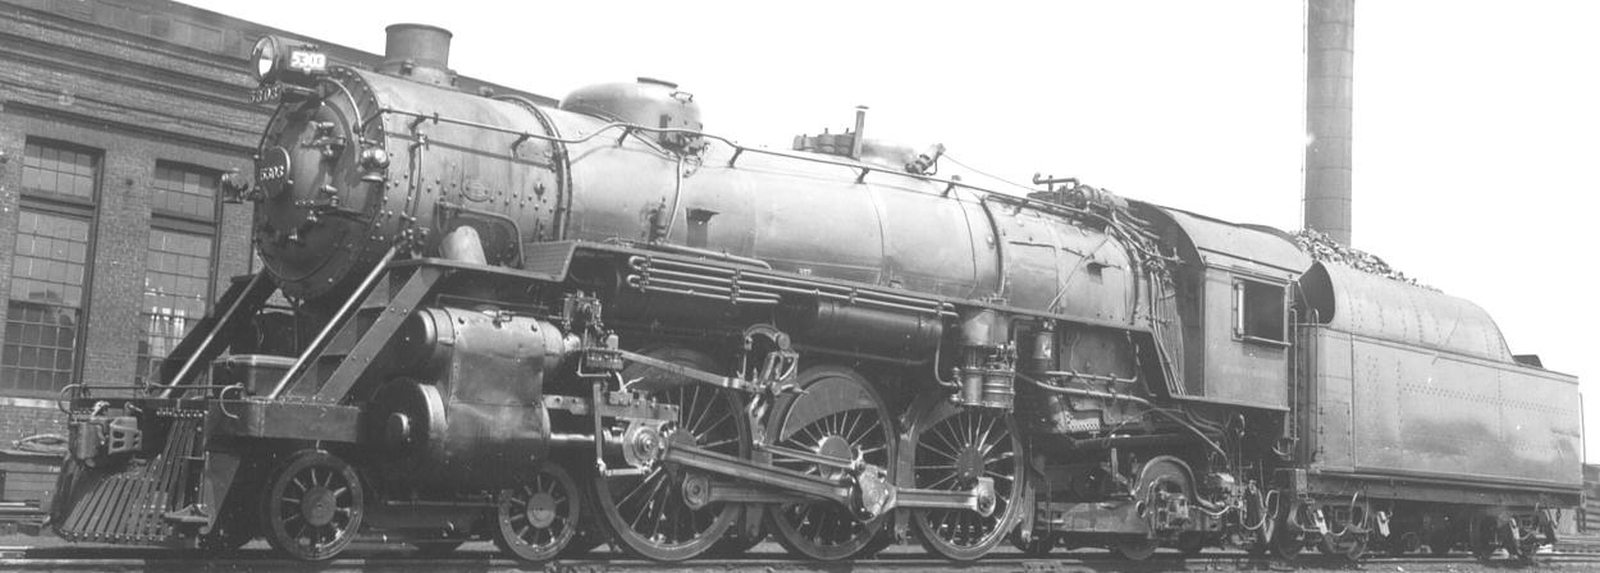 No. 5303 “President Madison” without streamlined fairing